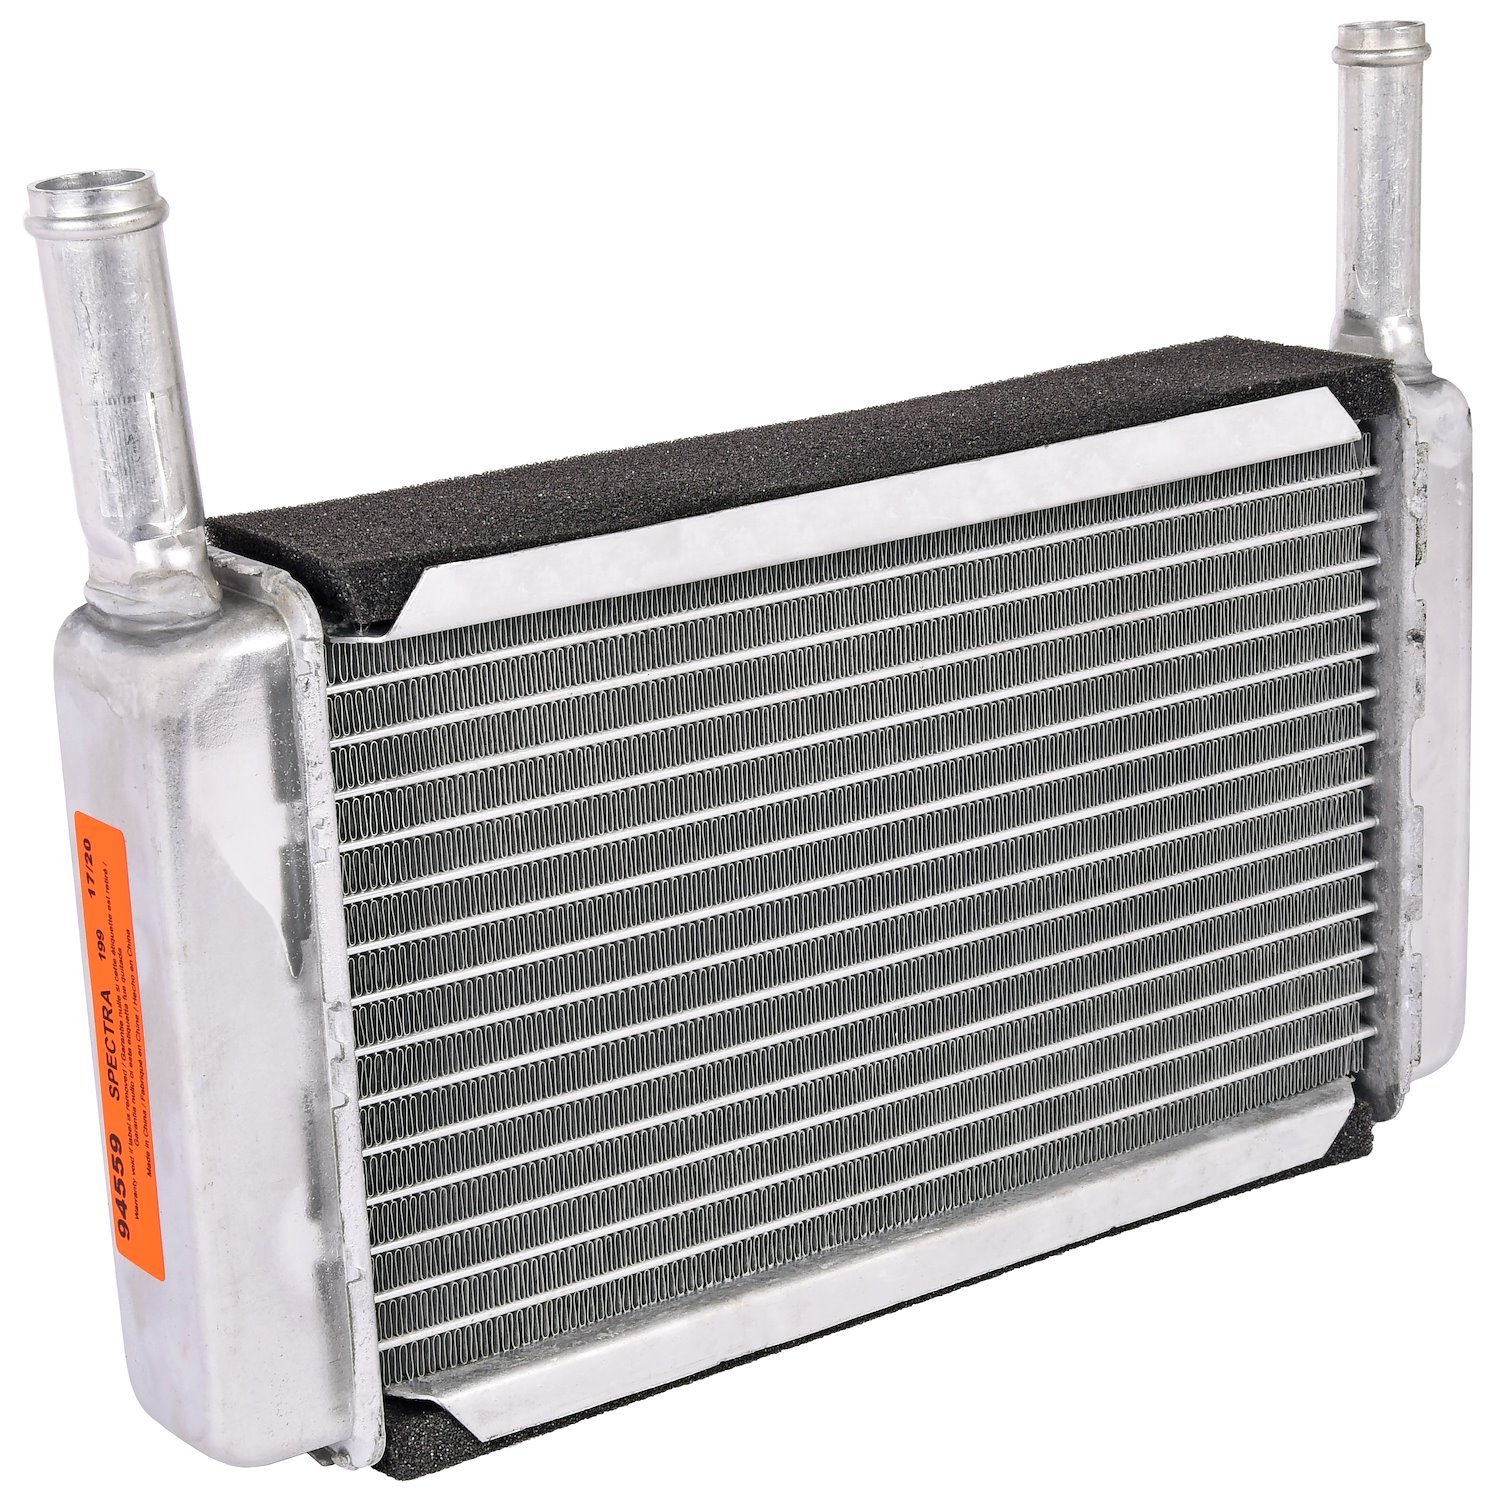 Heater Core Fits Select 1967-1972 GM Full-Size Truck, Suburban, Blazer, Jimmy, and Van Models without A/C